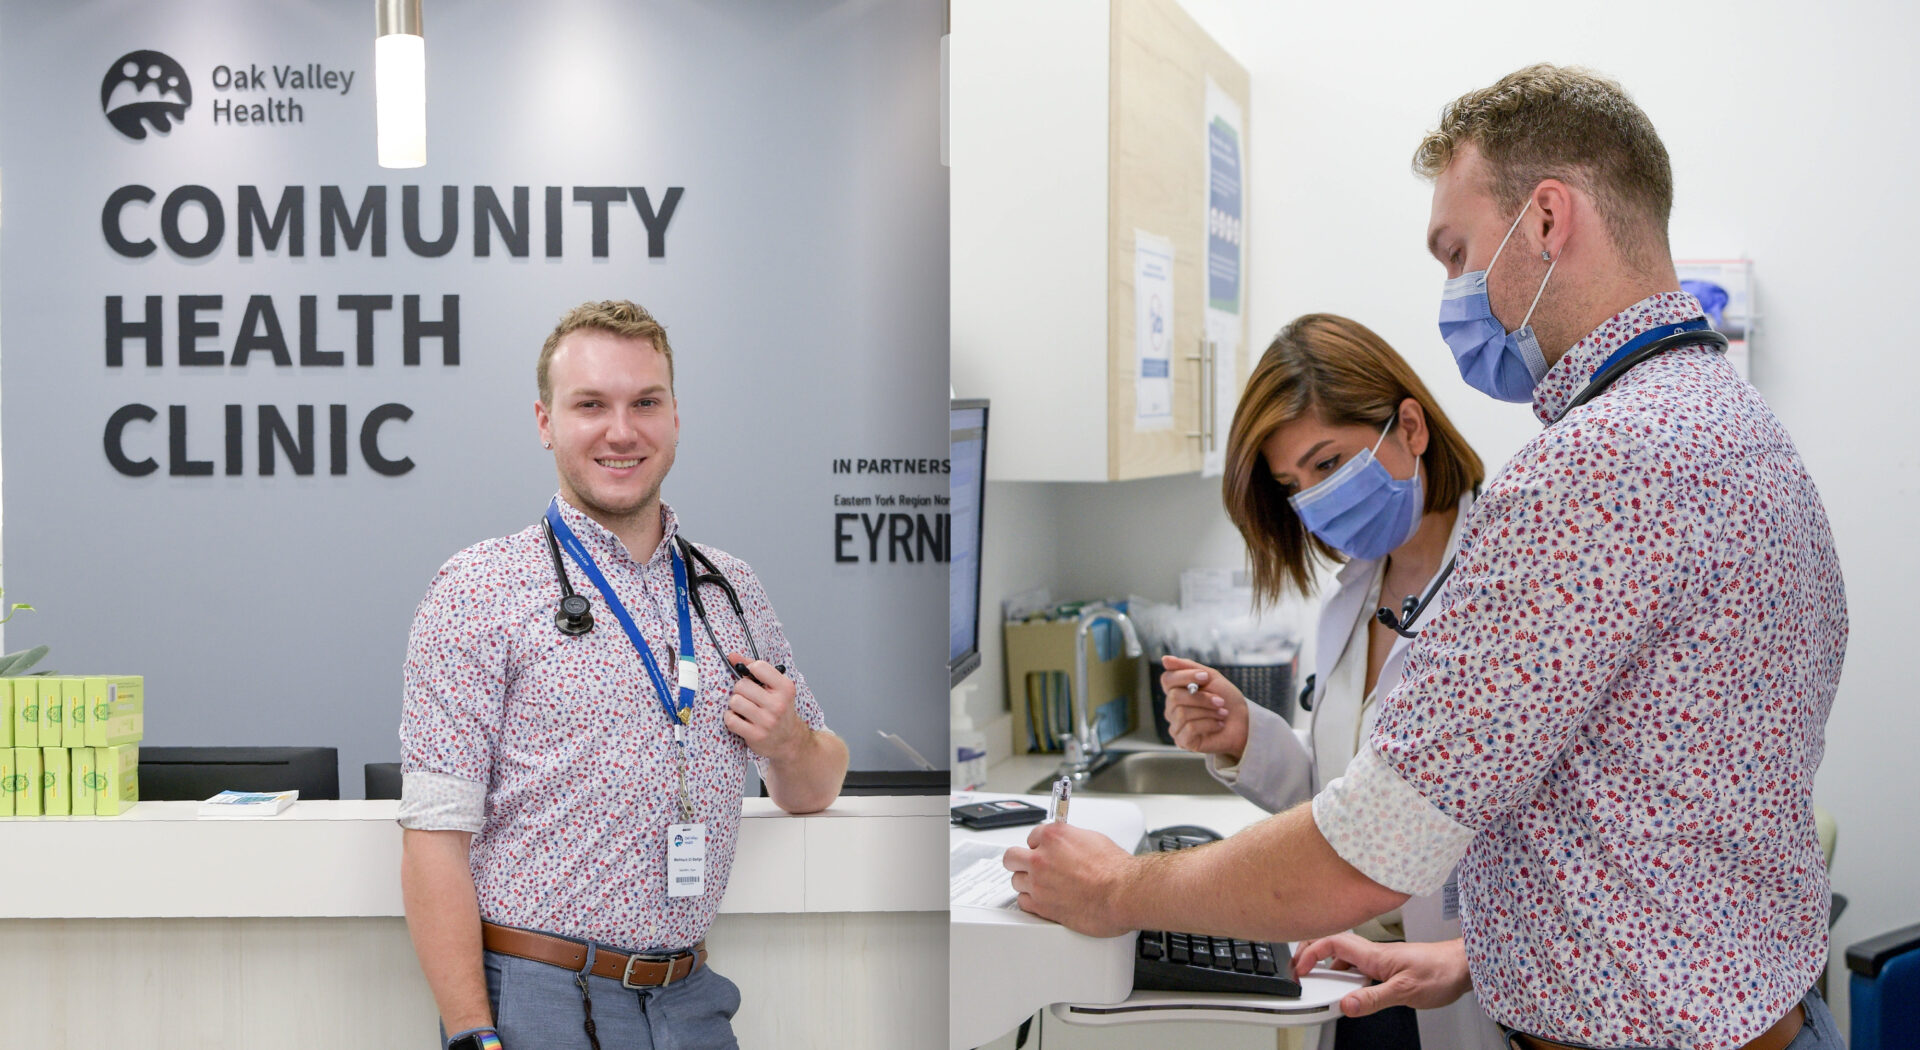 Image collage of Ryan Saunders, a Nurse Practitioner of the Community Health Clinic from Oak Valley Health. He is shown to be standing in front of the front desk, and also working with another physician inside the clinic.